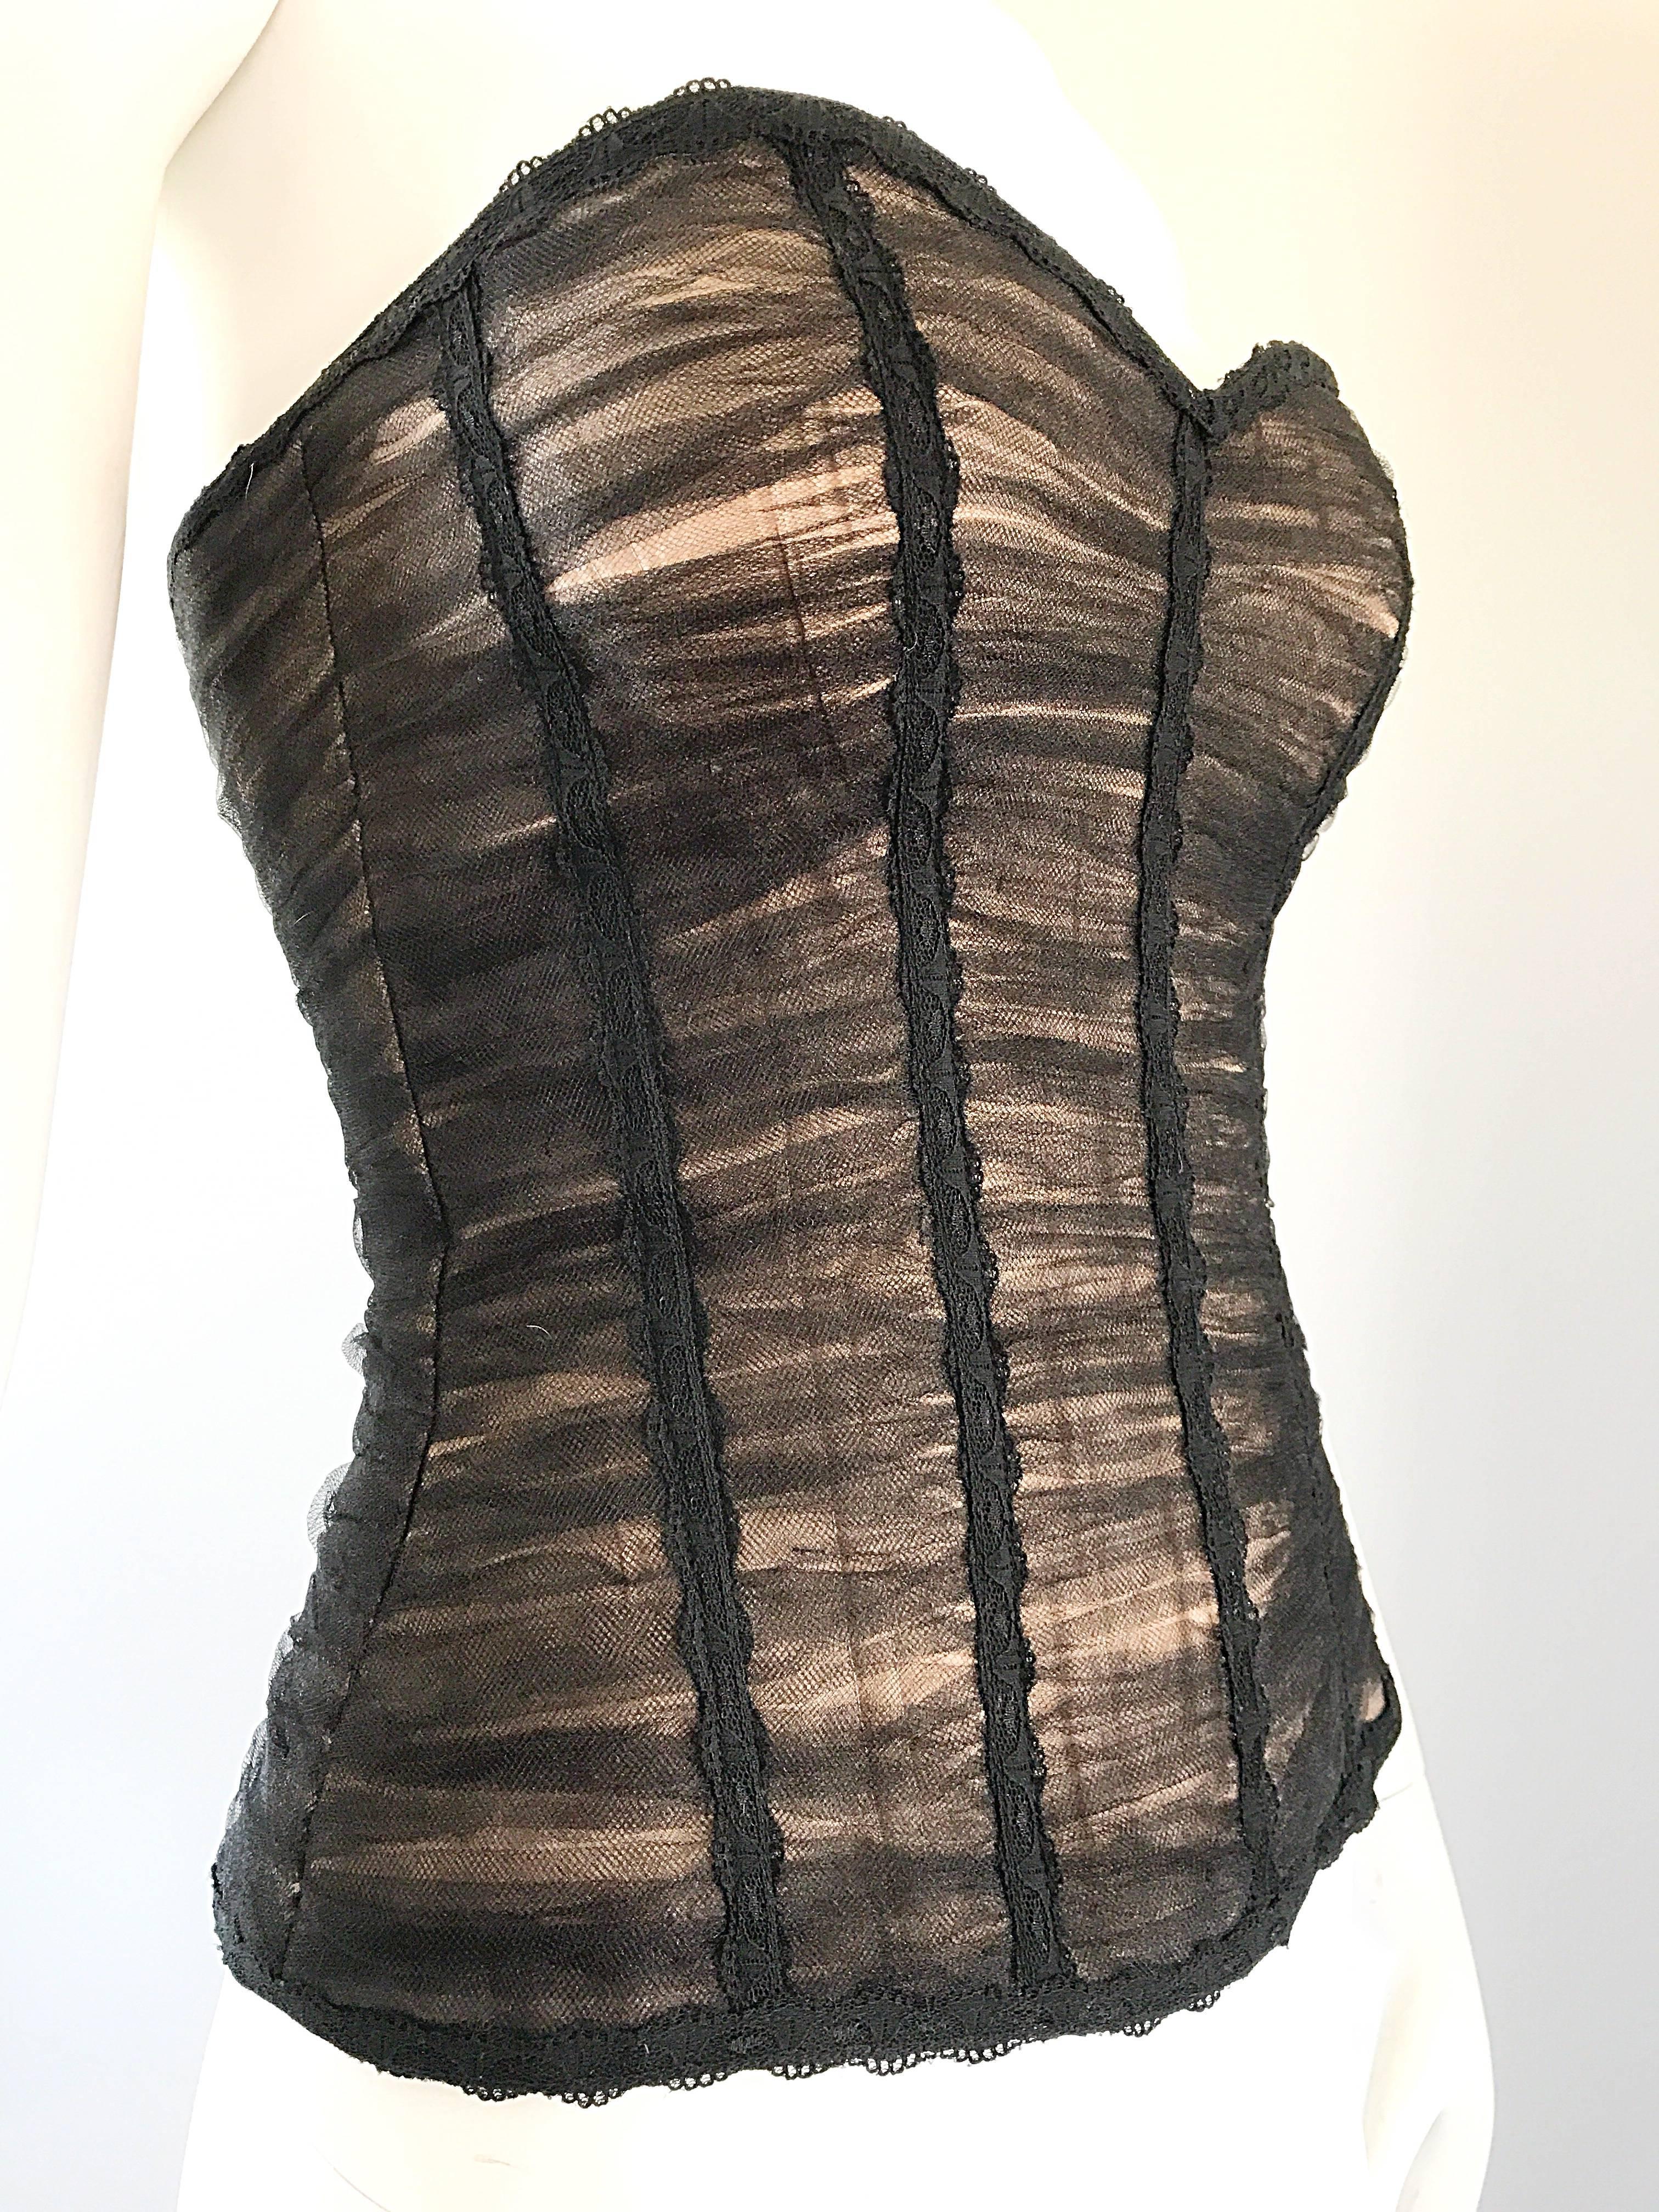 black and nude corset